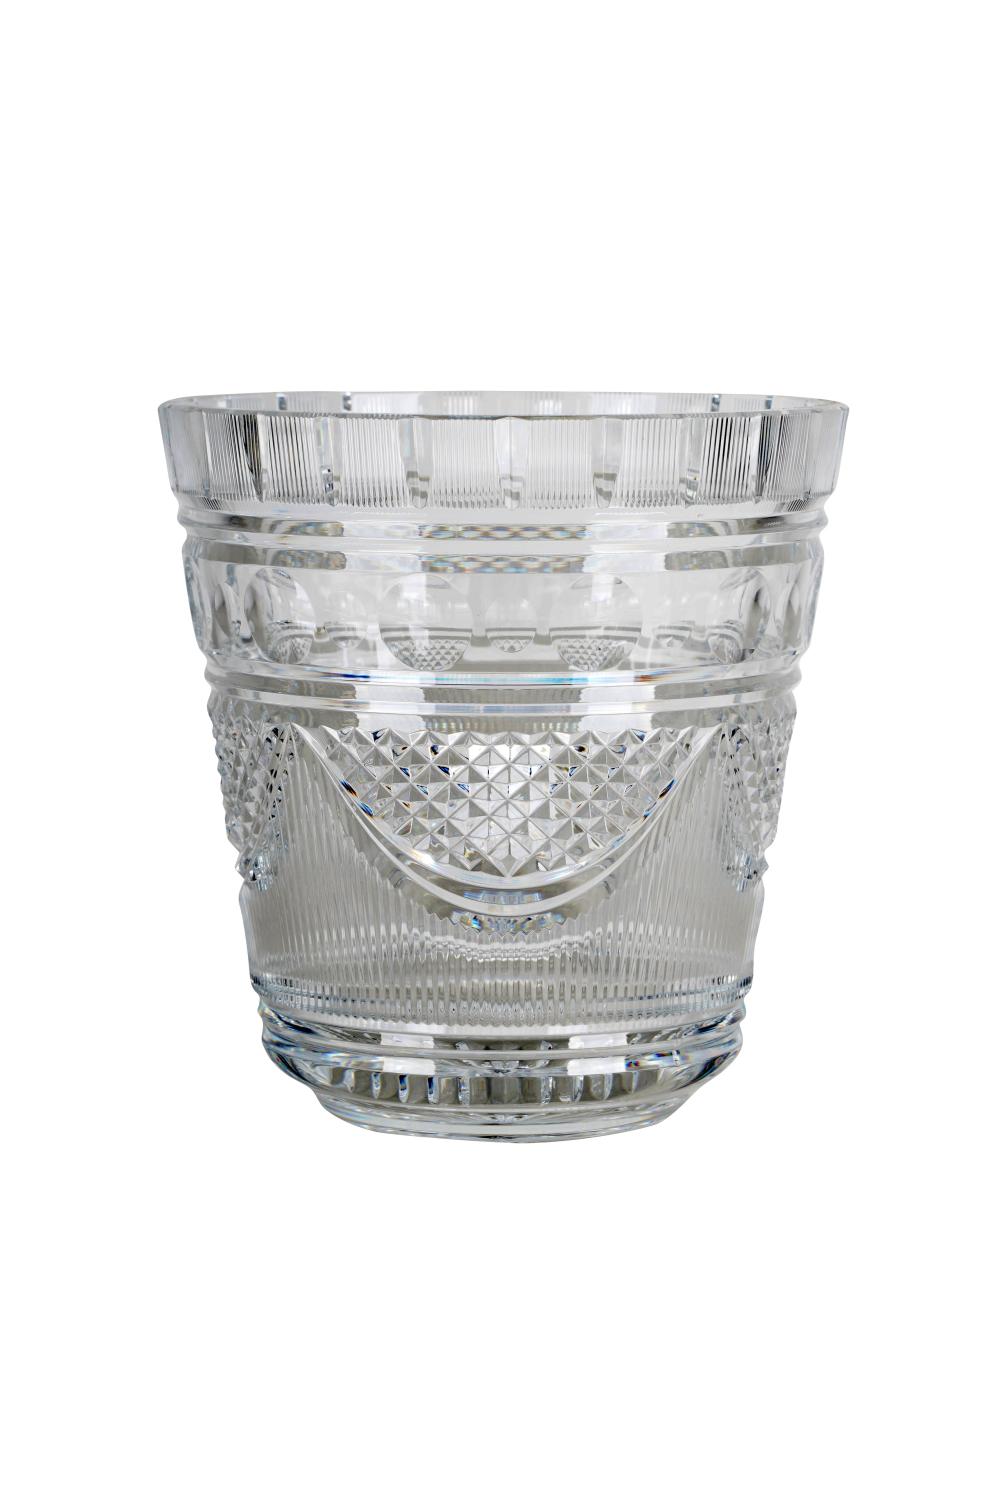 WATERFORD CRYSTAL ICE BUCKETCondition: